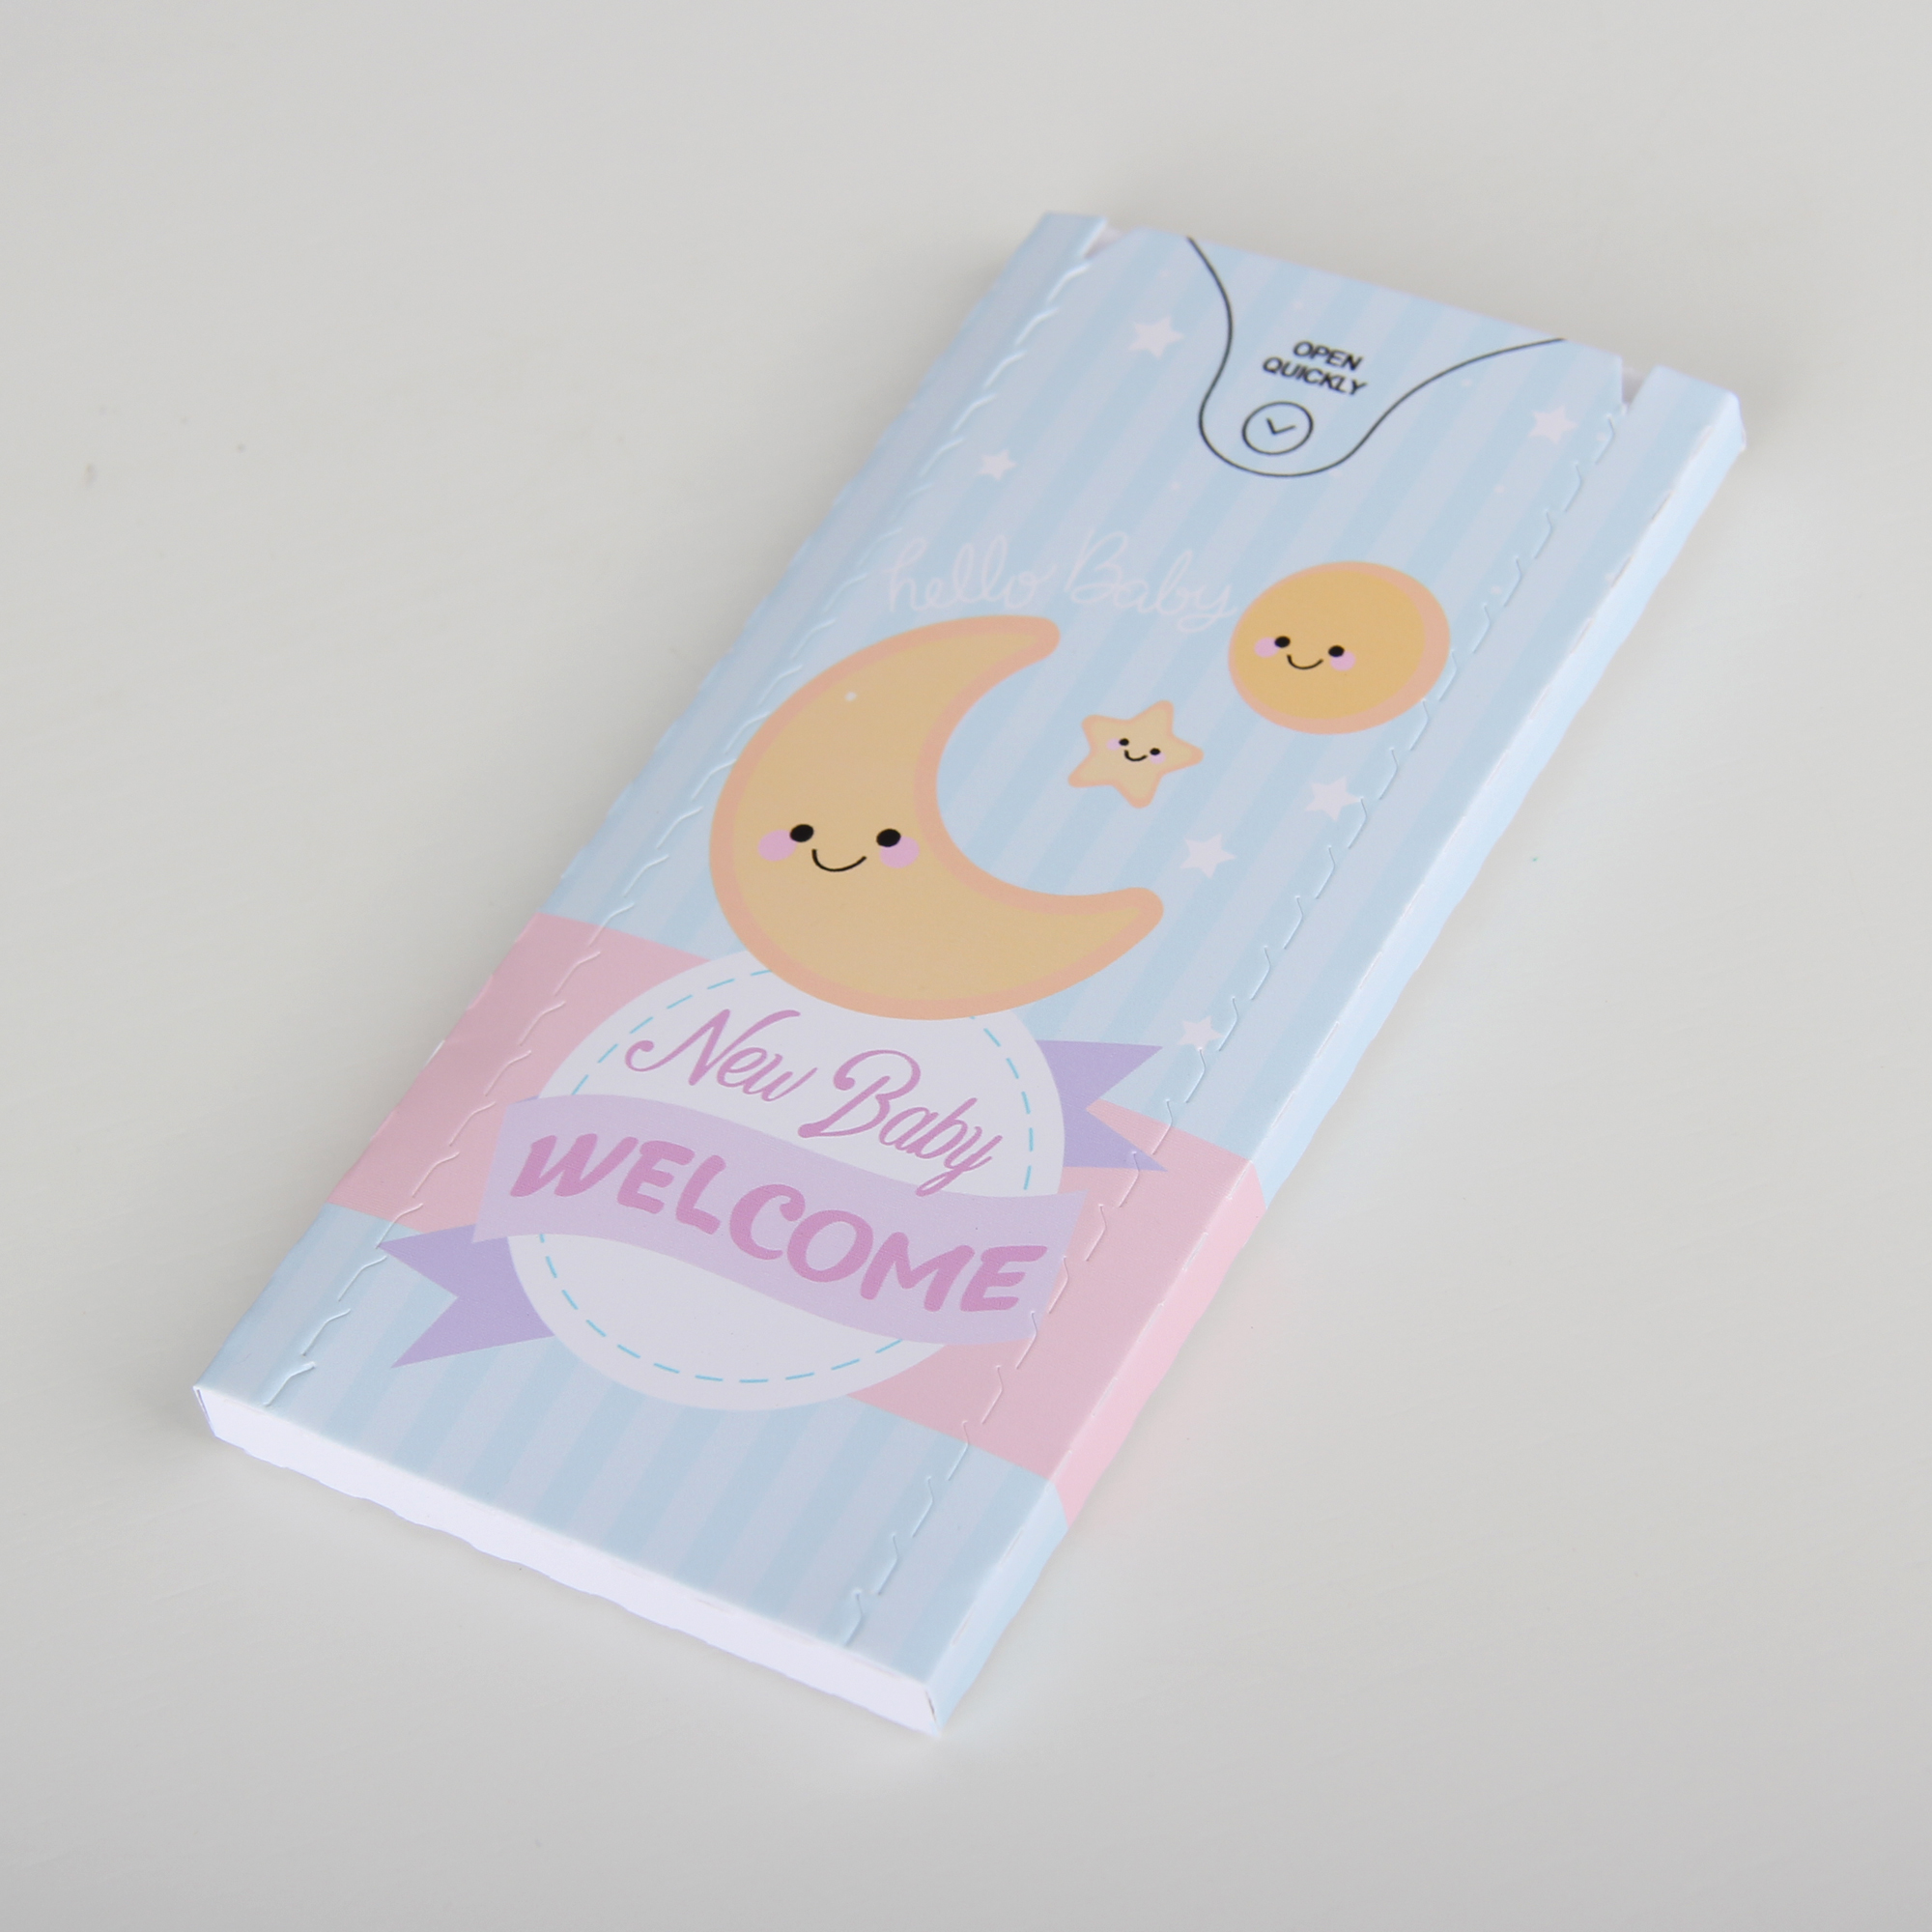 Boom card - New baby